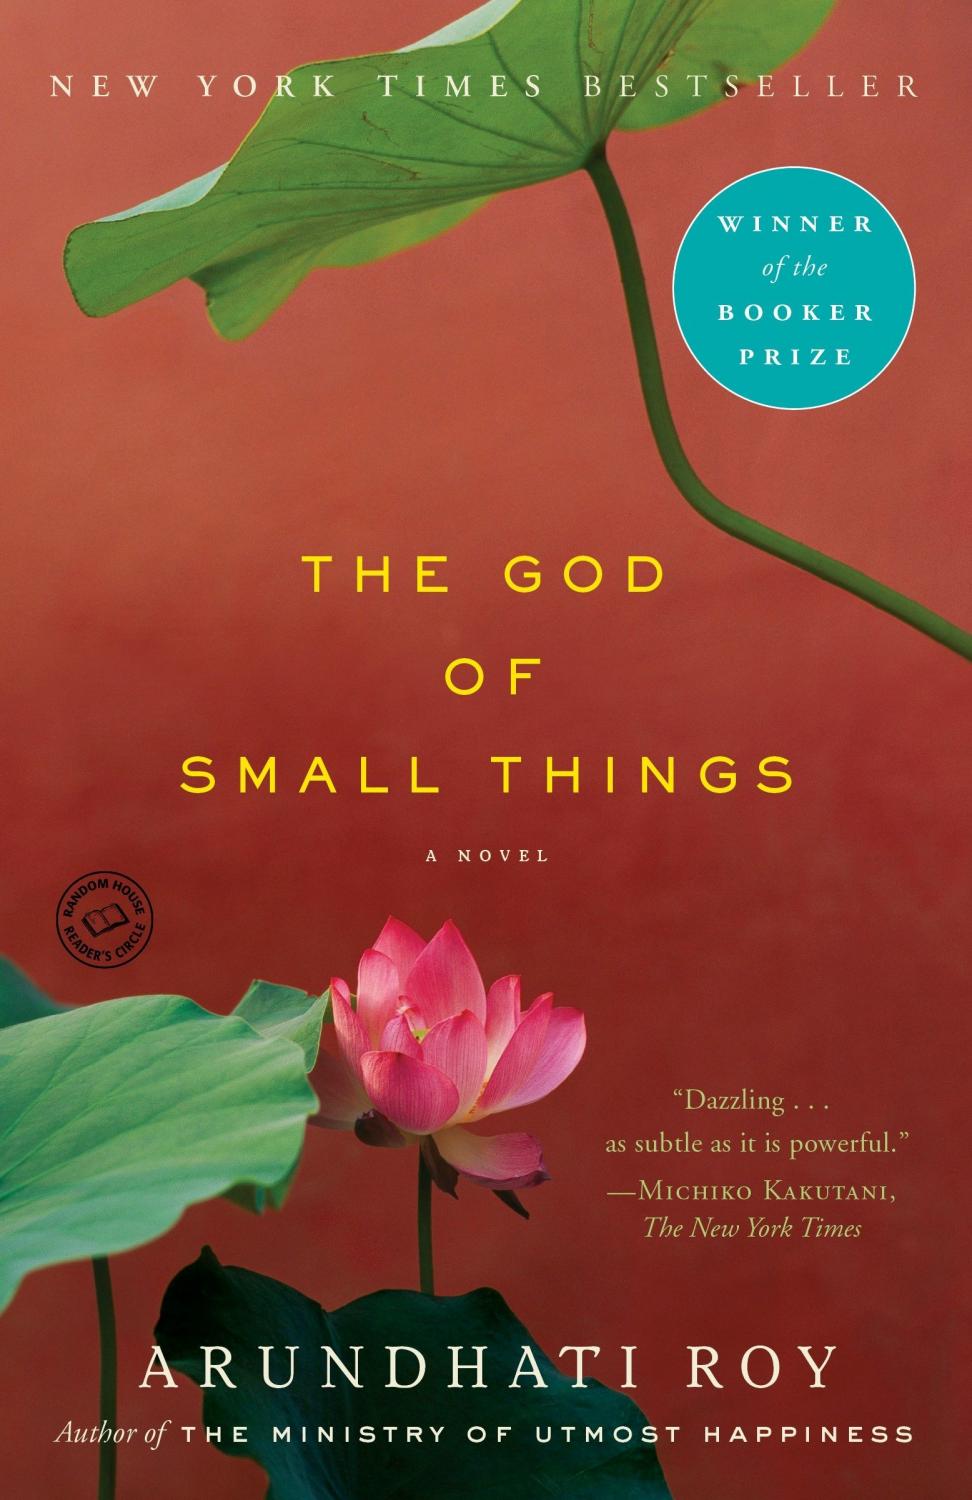 Cover of The God of Small Things by Arundhati Roy